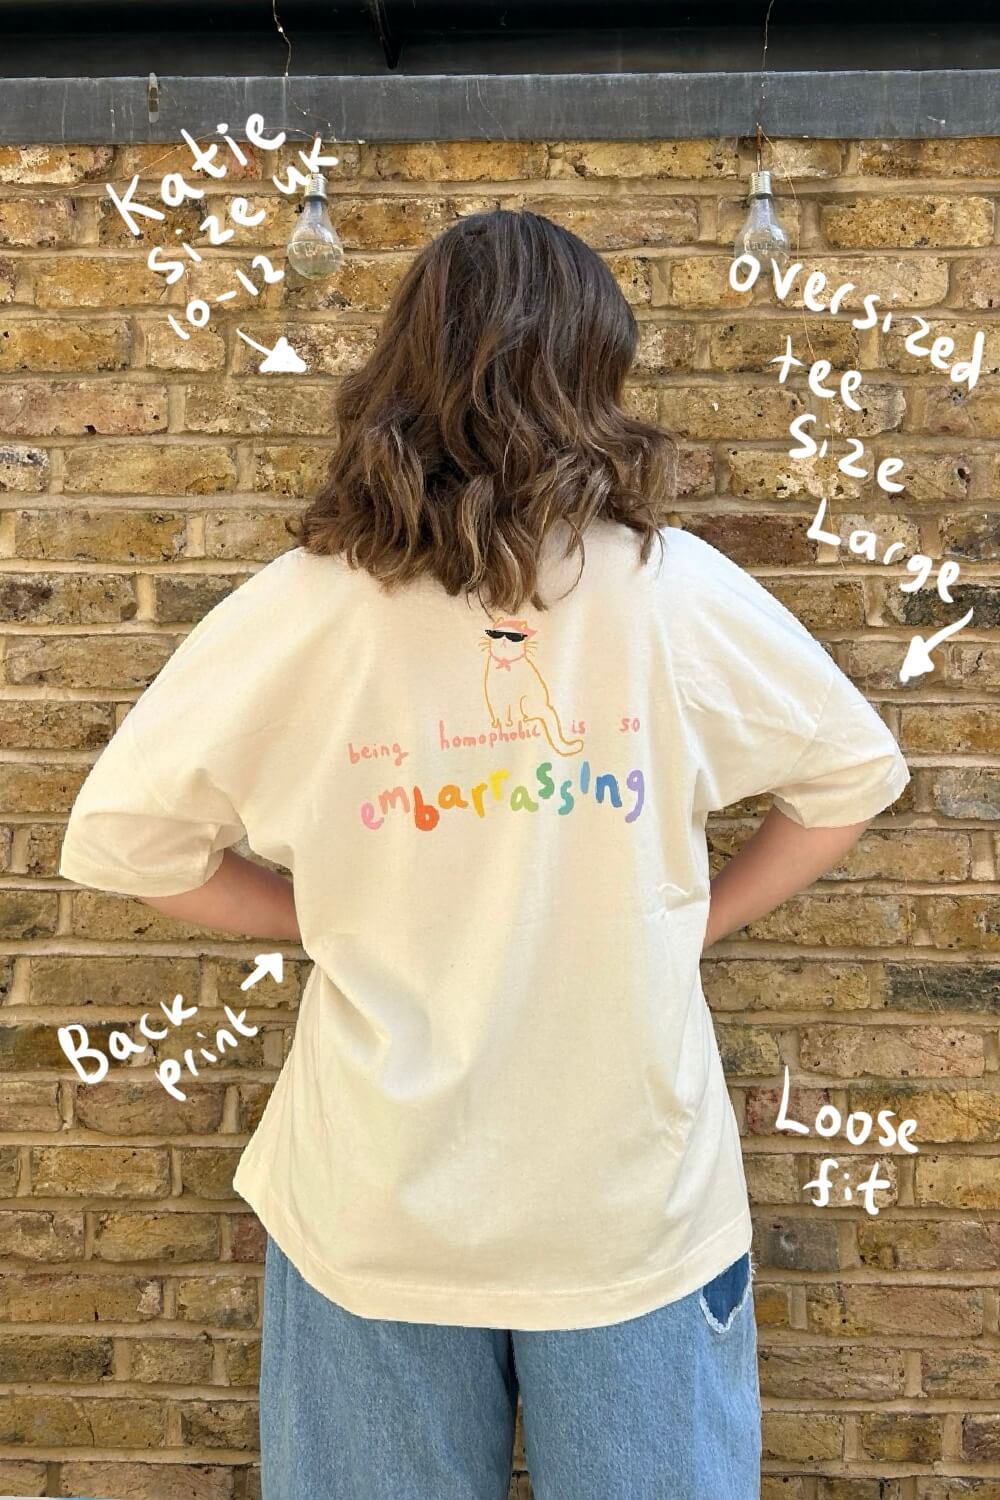 Pride cat oversized charity tshirt, in collaboration with Katie Budenberg